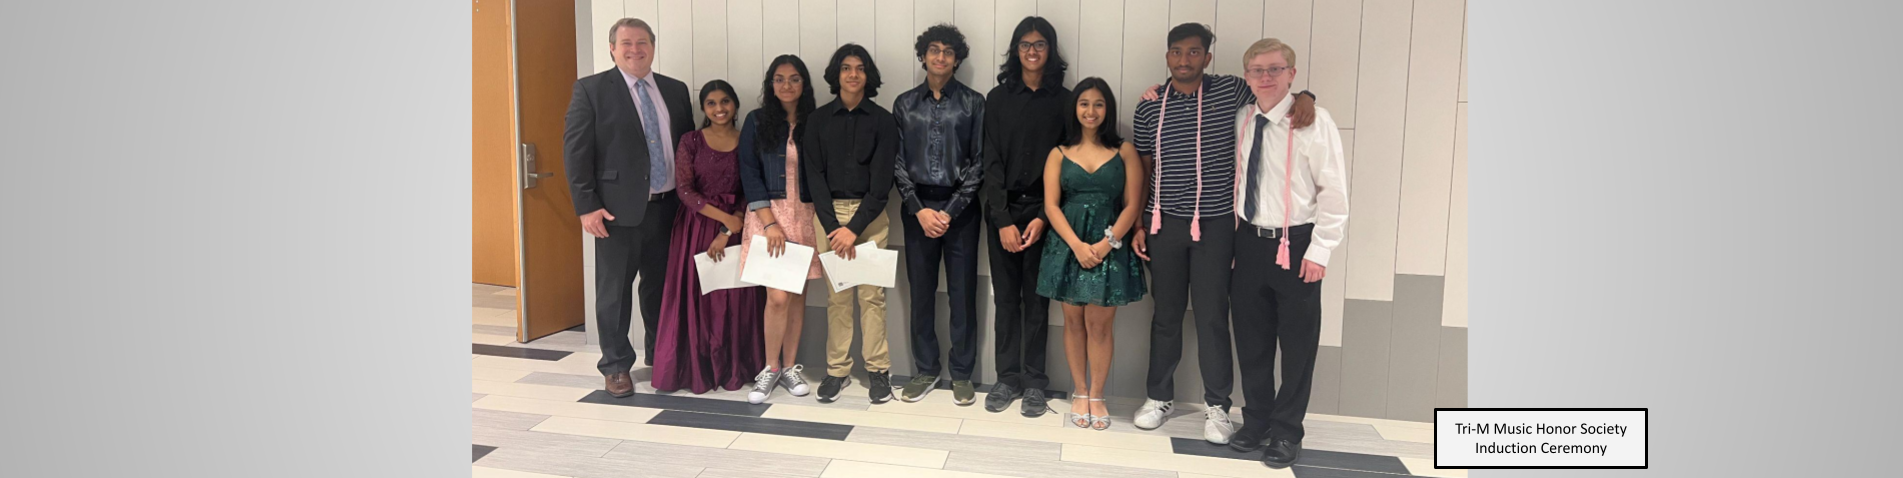 Tri-M Music Honor Society Induction Members